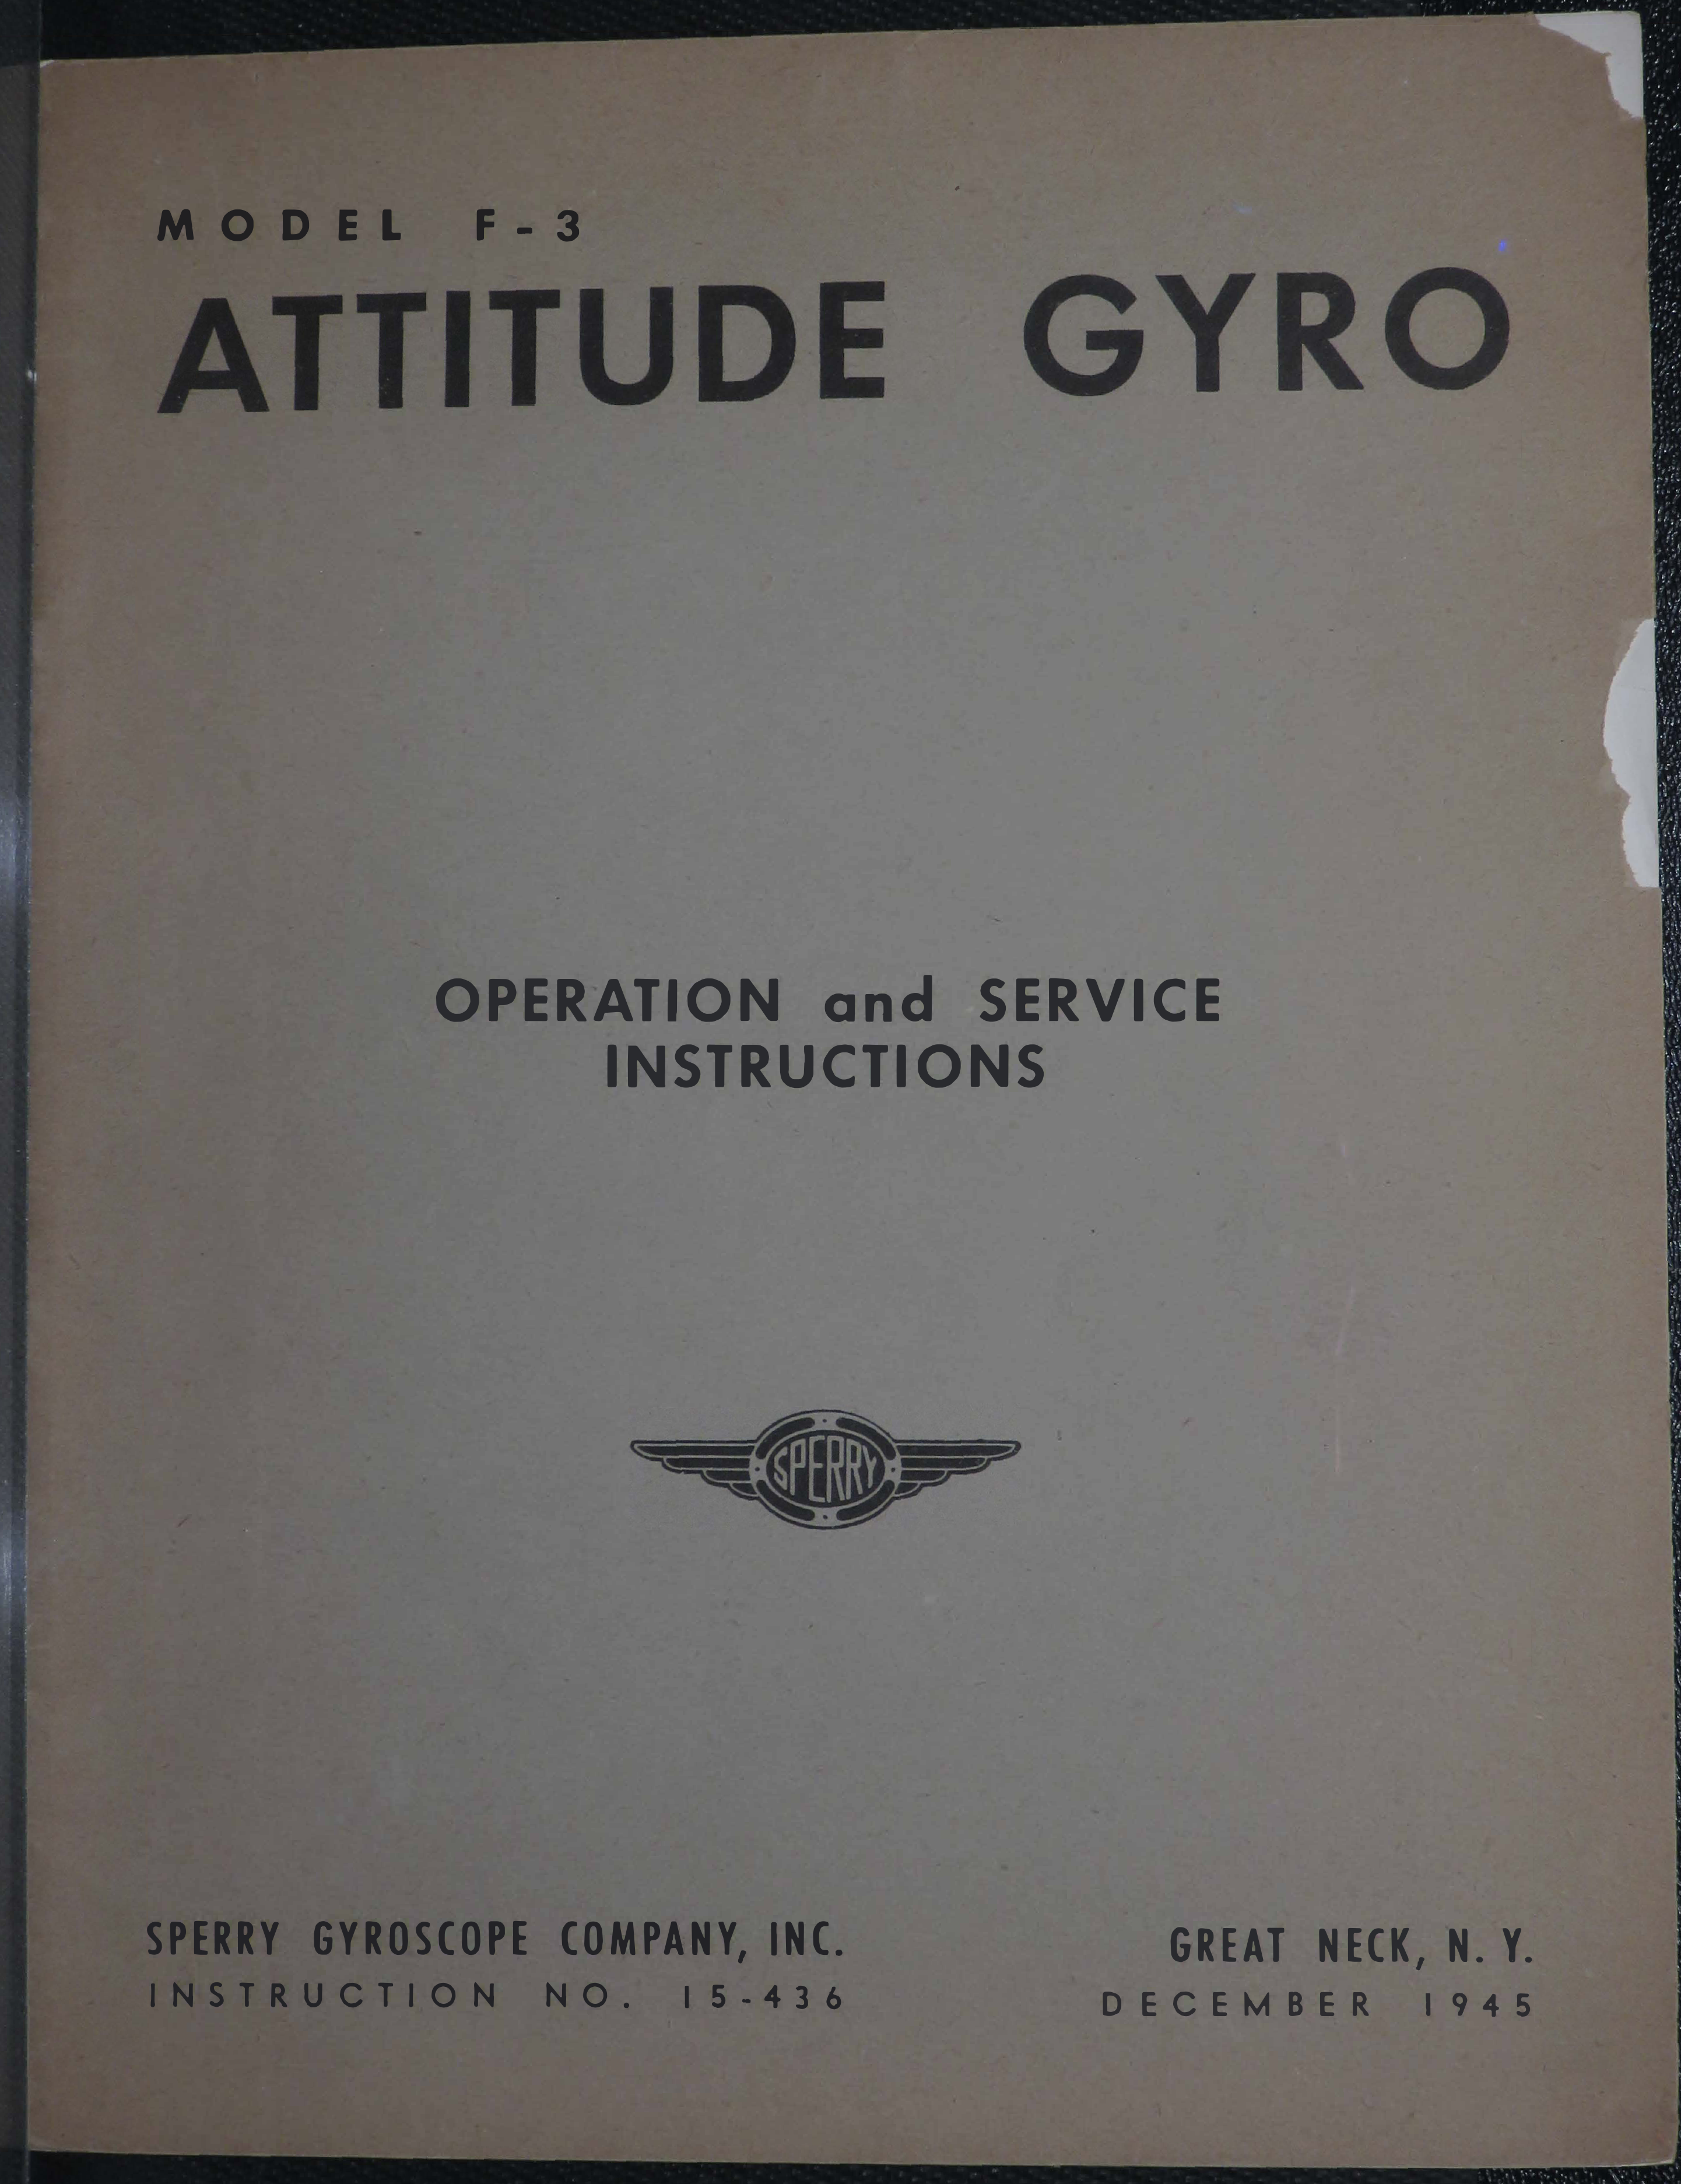 Sample page 1 from AirCorps Library document: Operation and Service Instructions for Attitude Gyro Model F-3